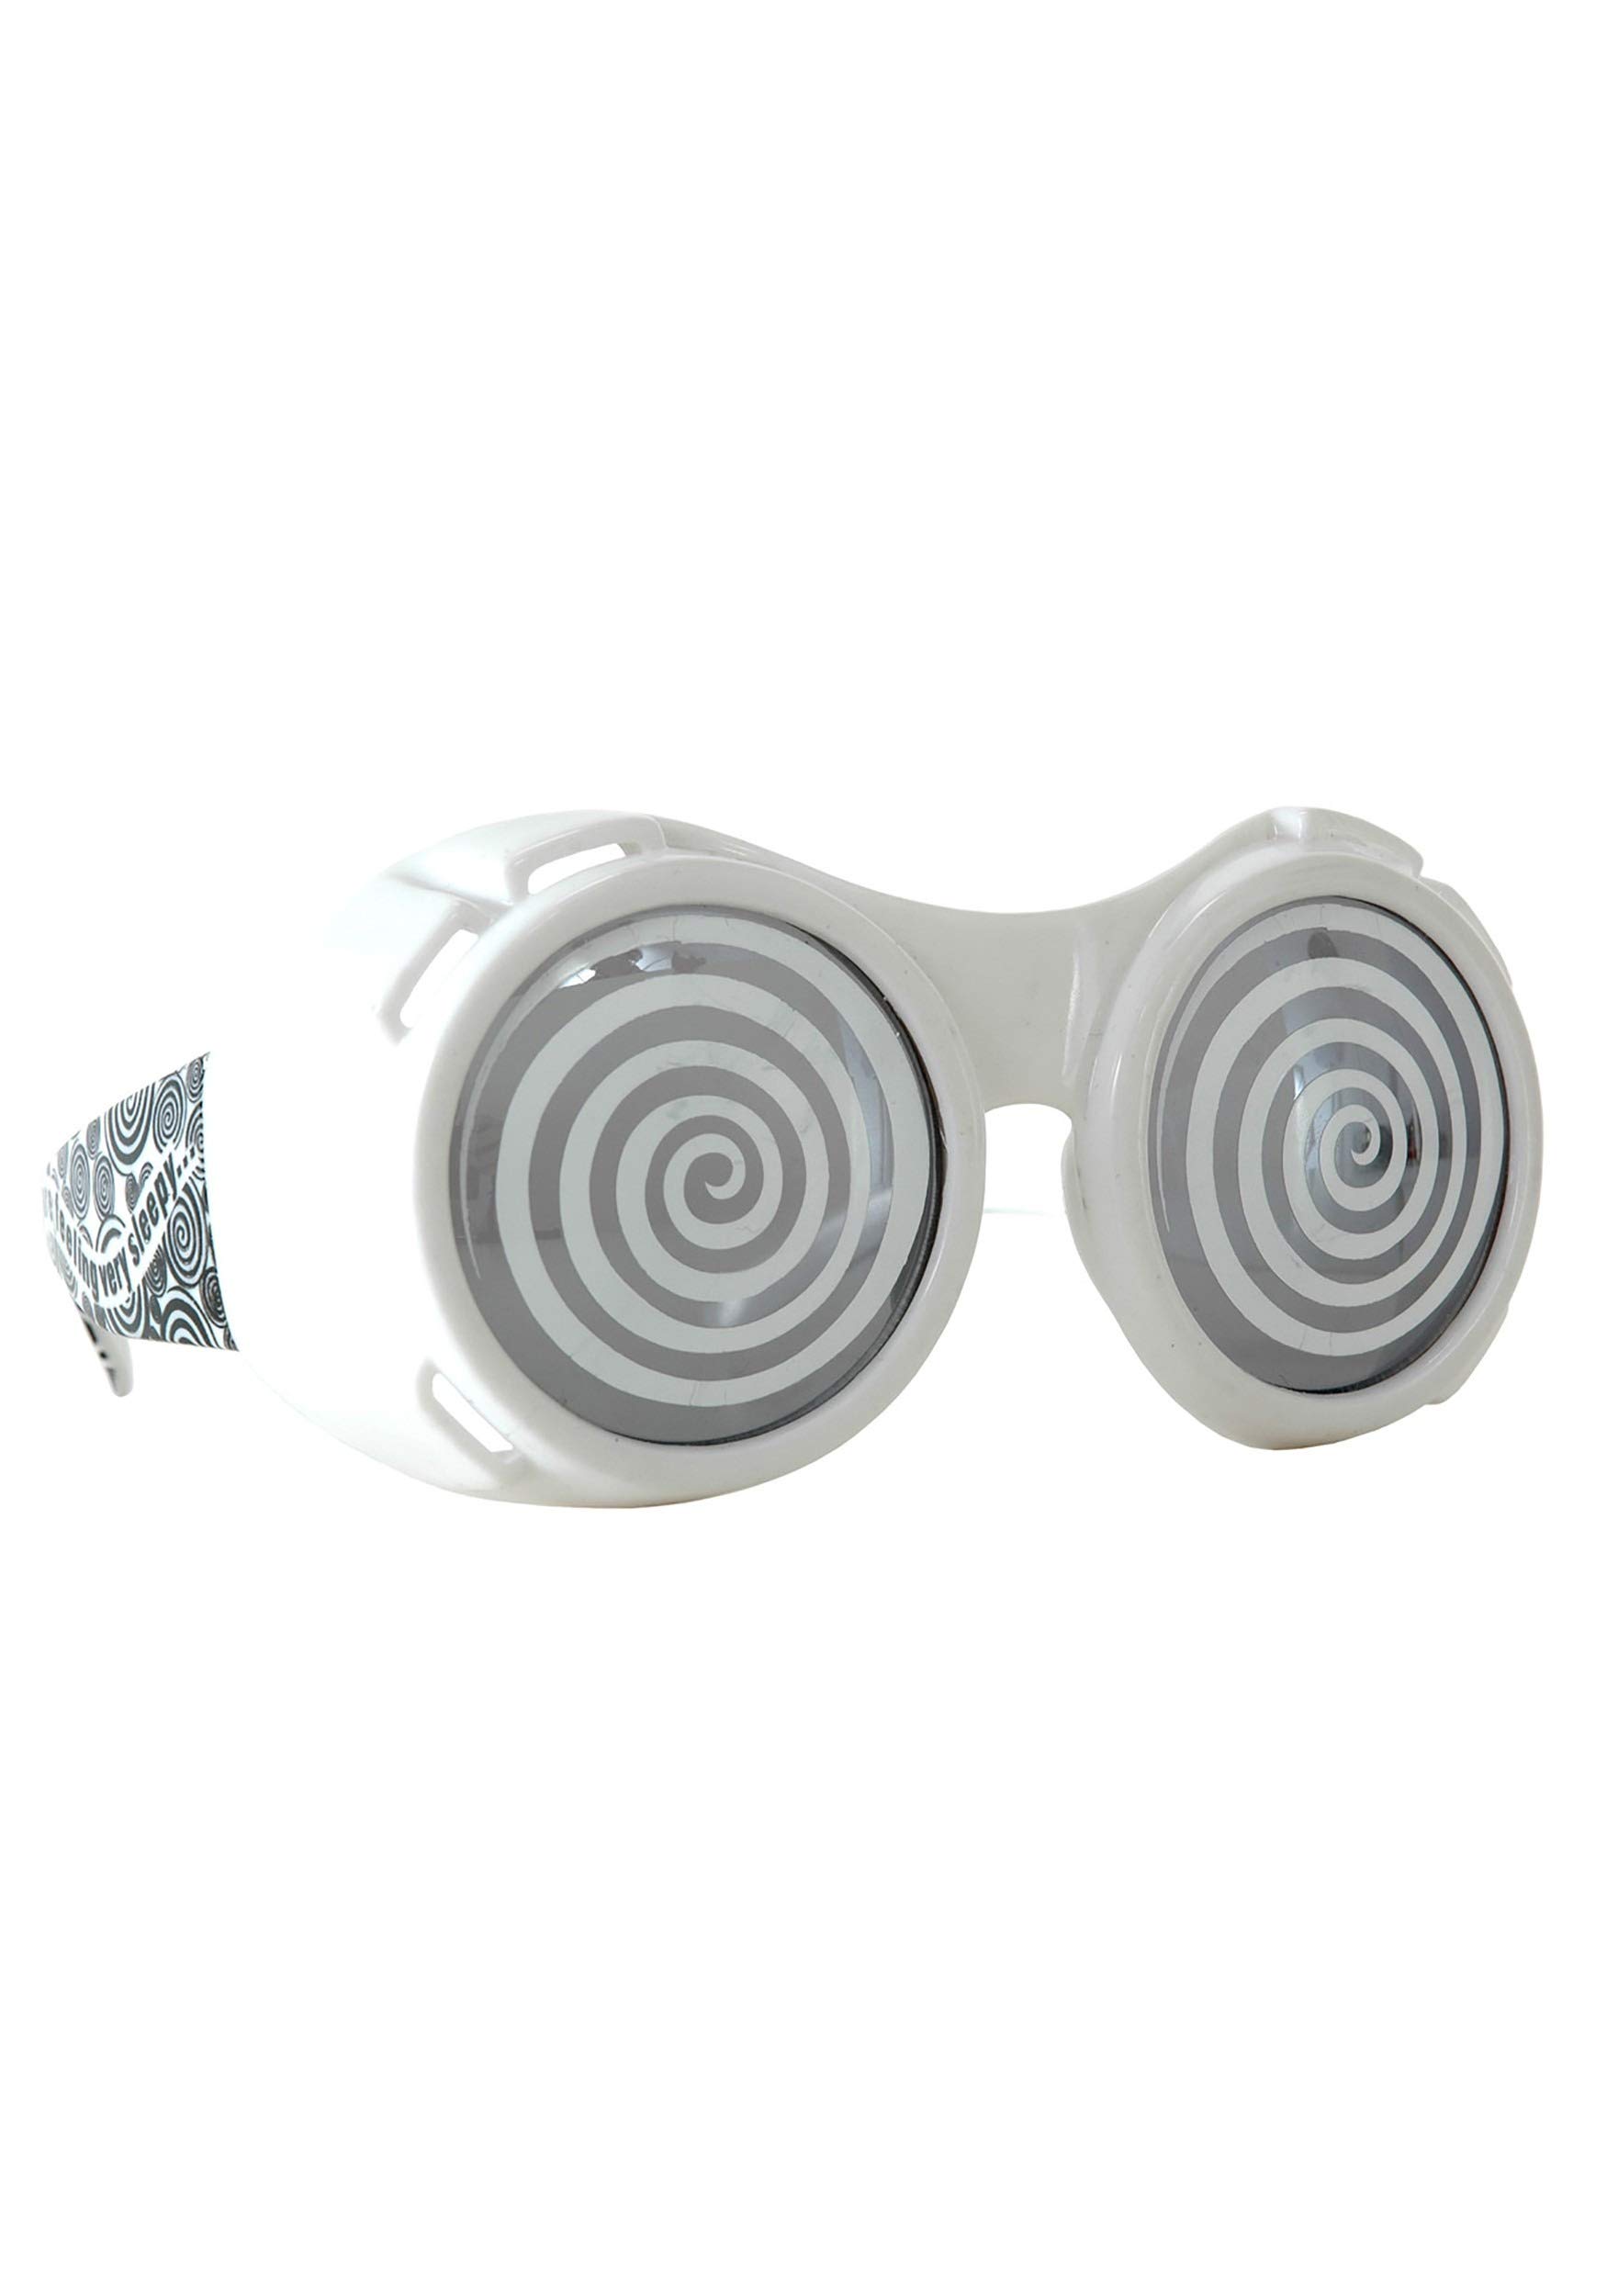 elope White Hypno Retro Style Goggles for Adults and Kids